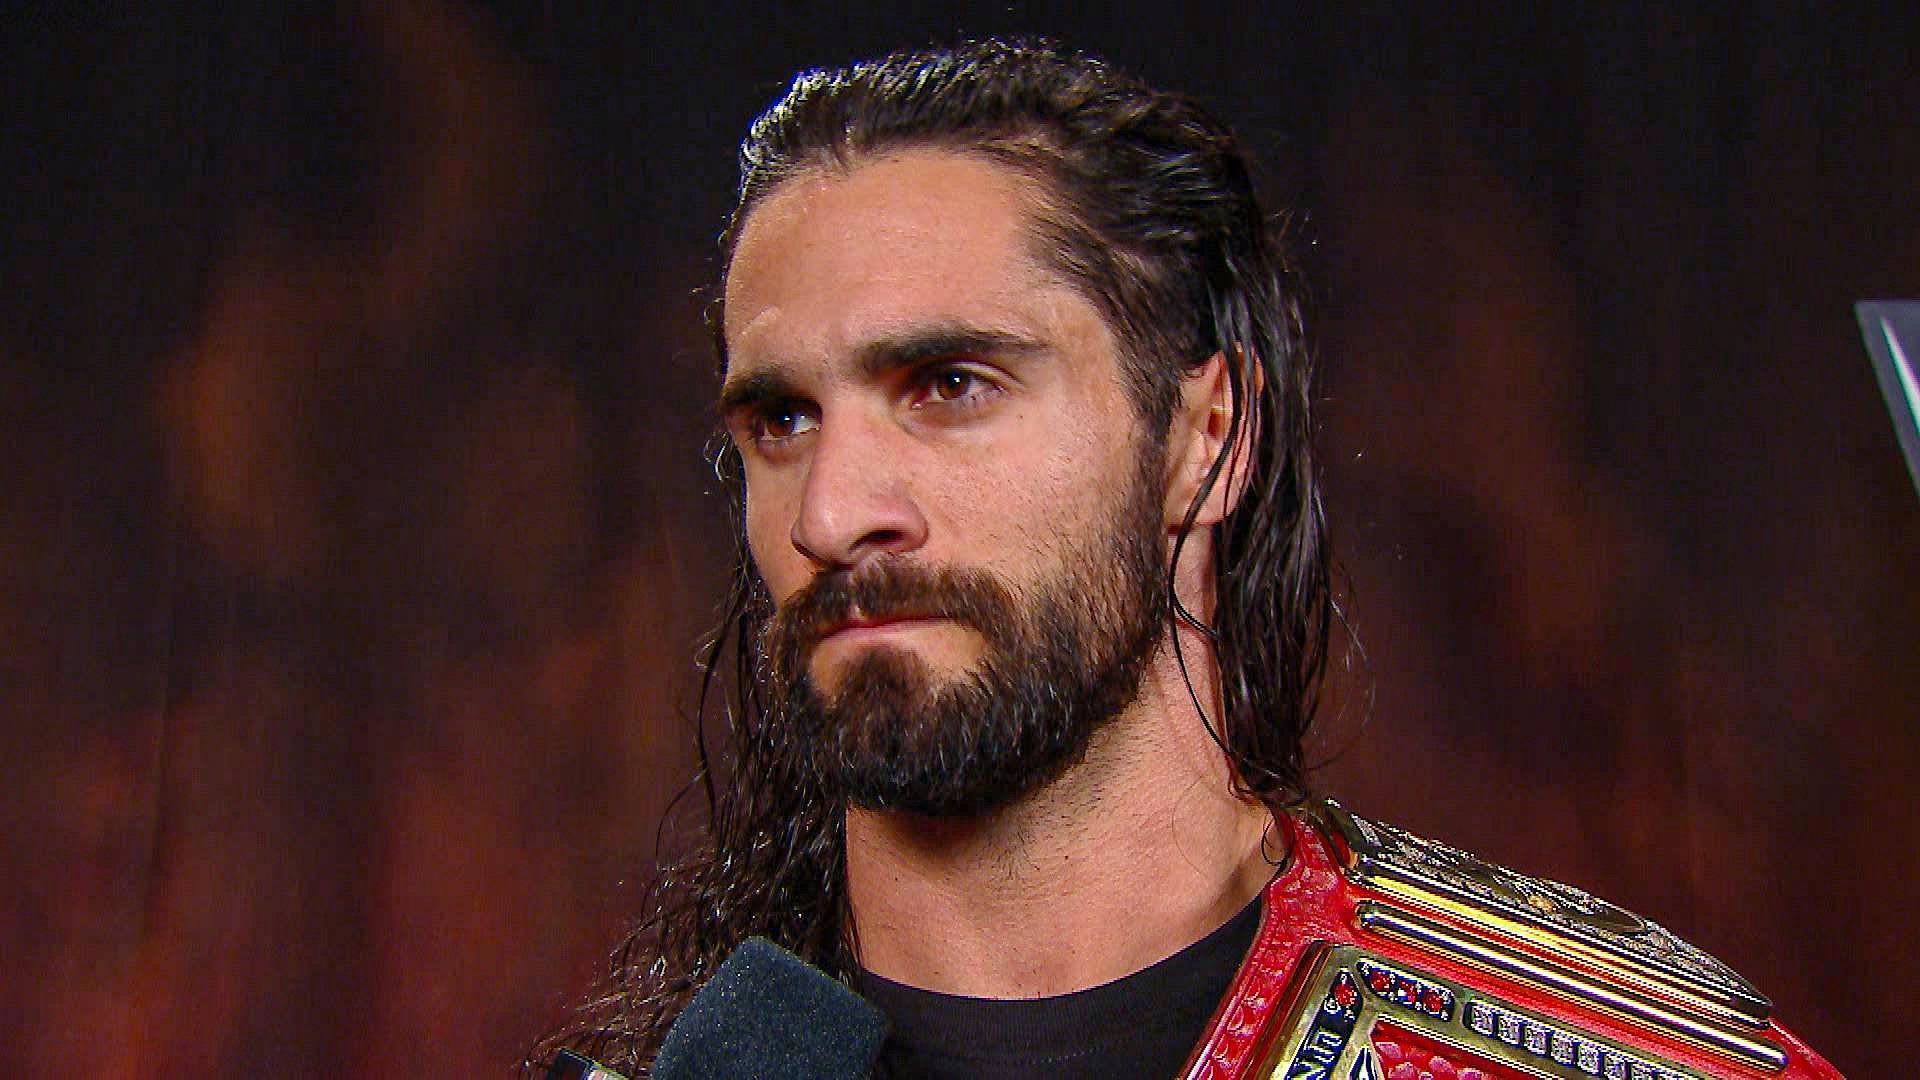 Seth Rollins as the Universal Champion